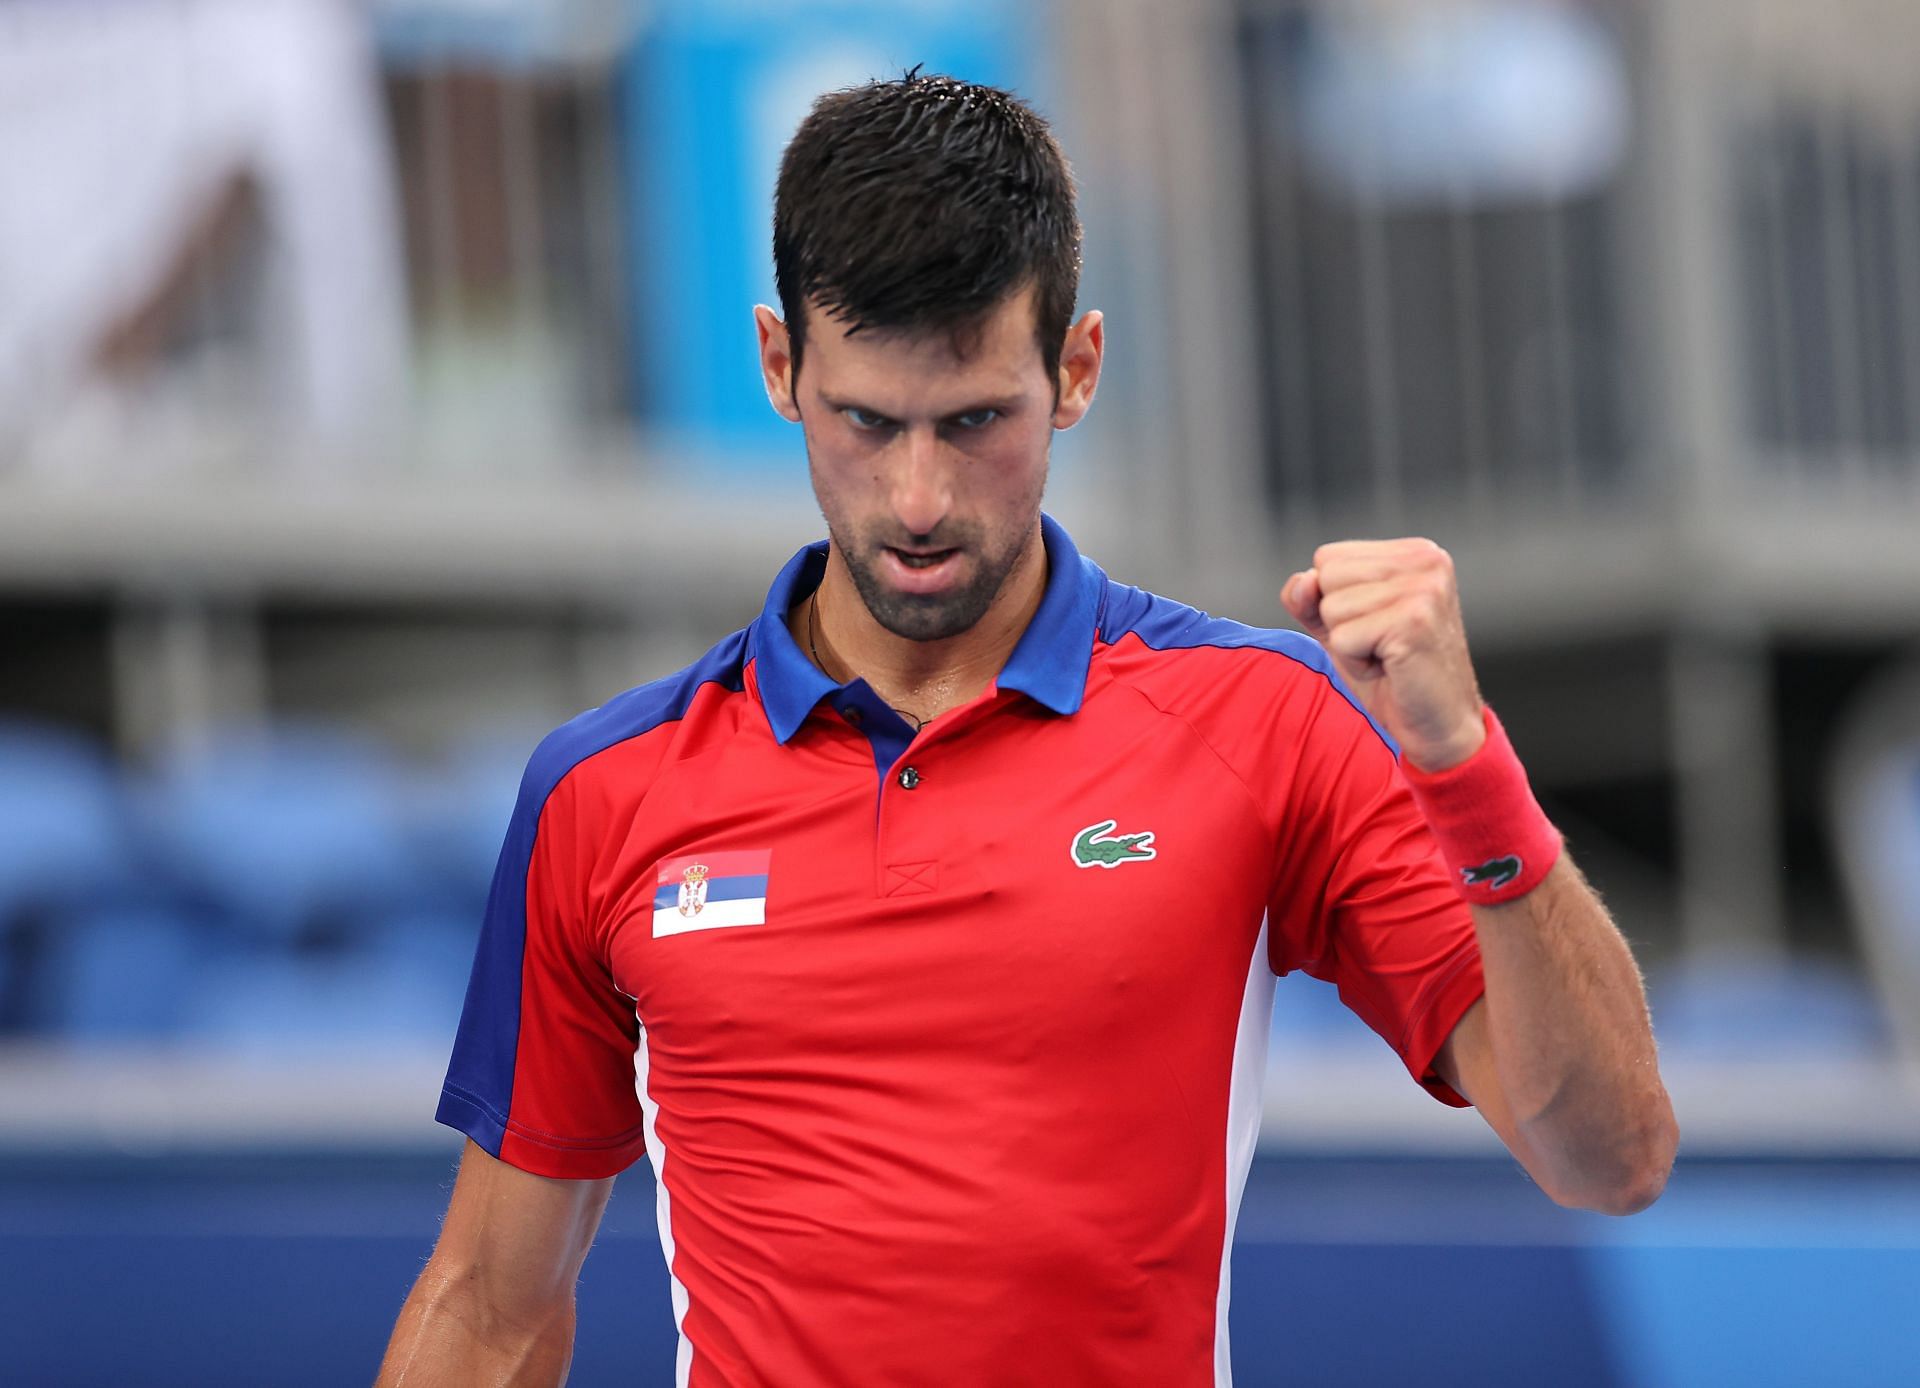 Djokovic wearing his Lacoste outfit during the Tokyo Olympics.